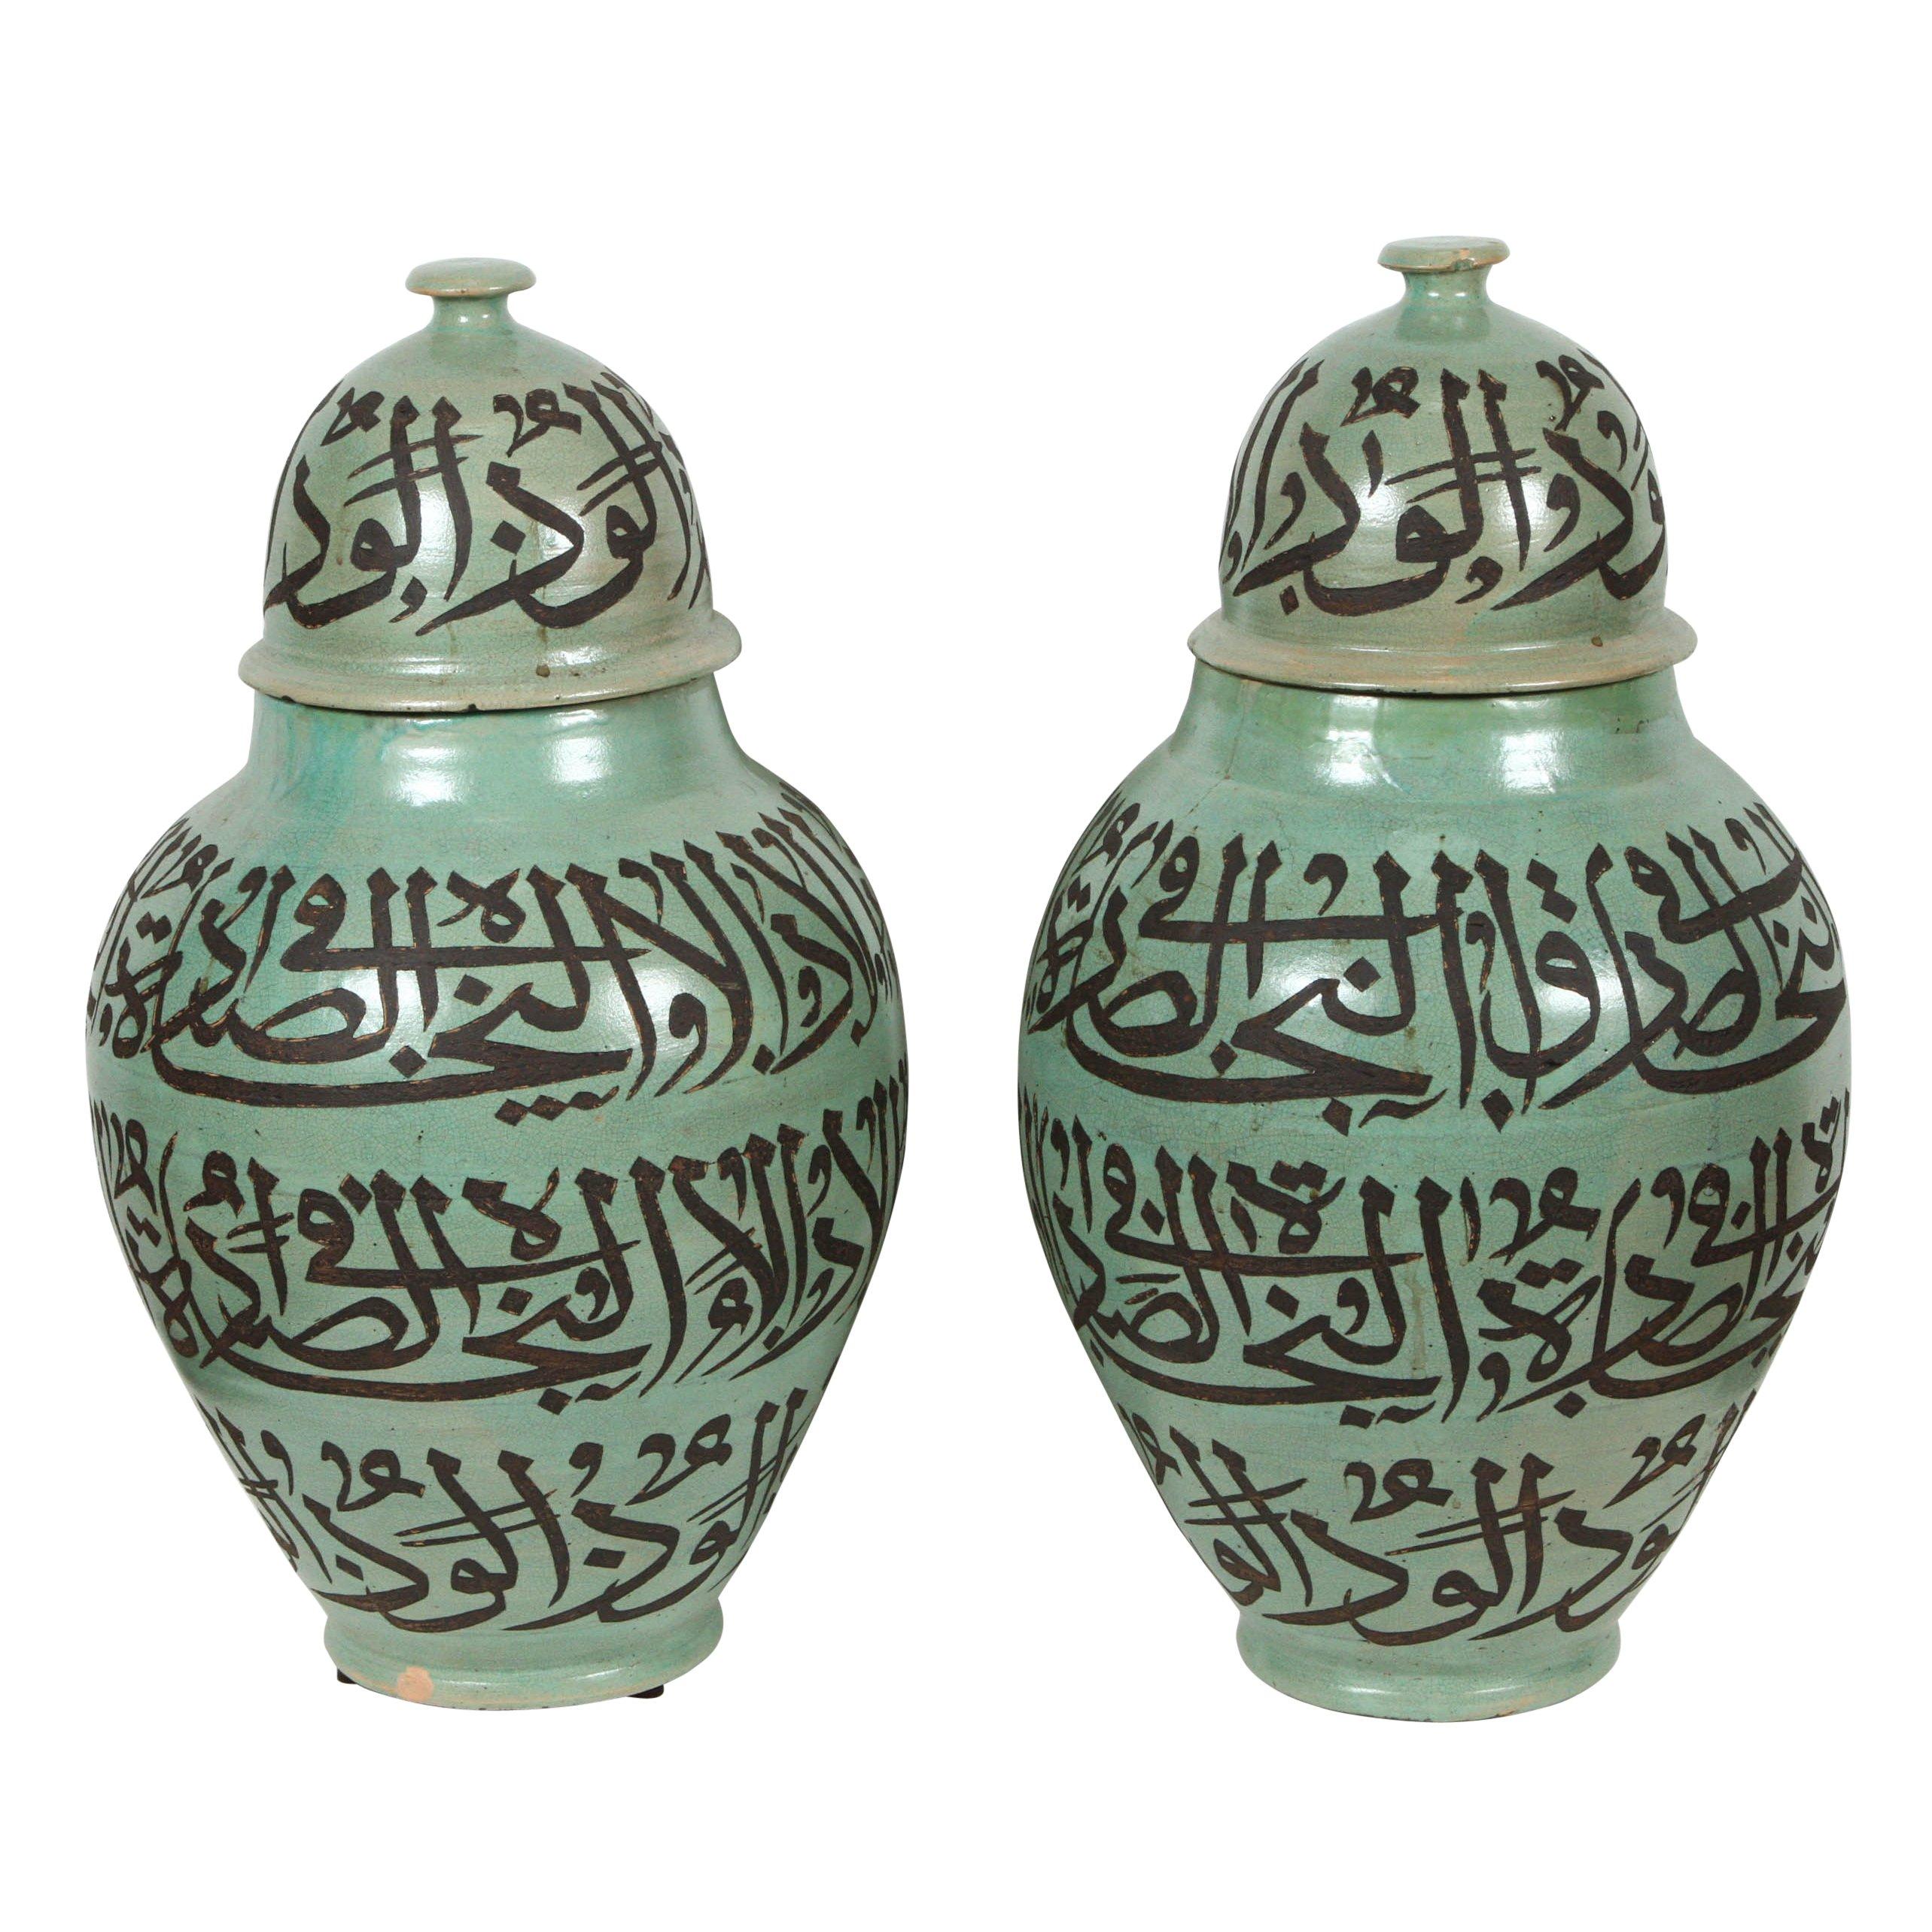 Green Moorish Ceramic Urns with Chiseled Arabic Calligraphy Writing For Sale